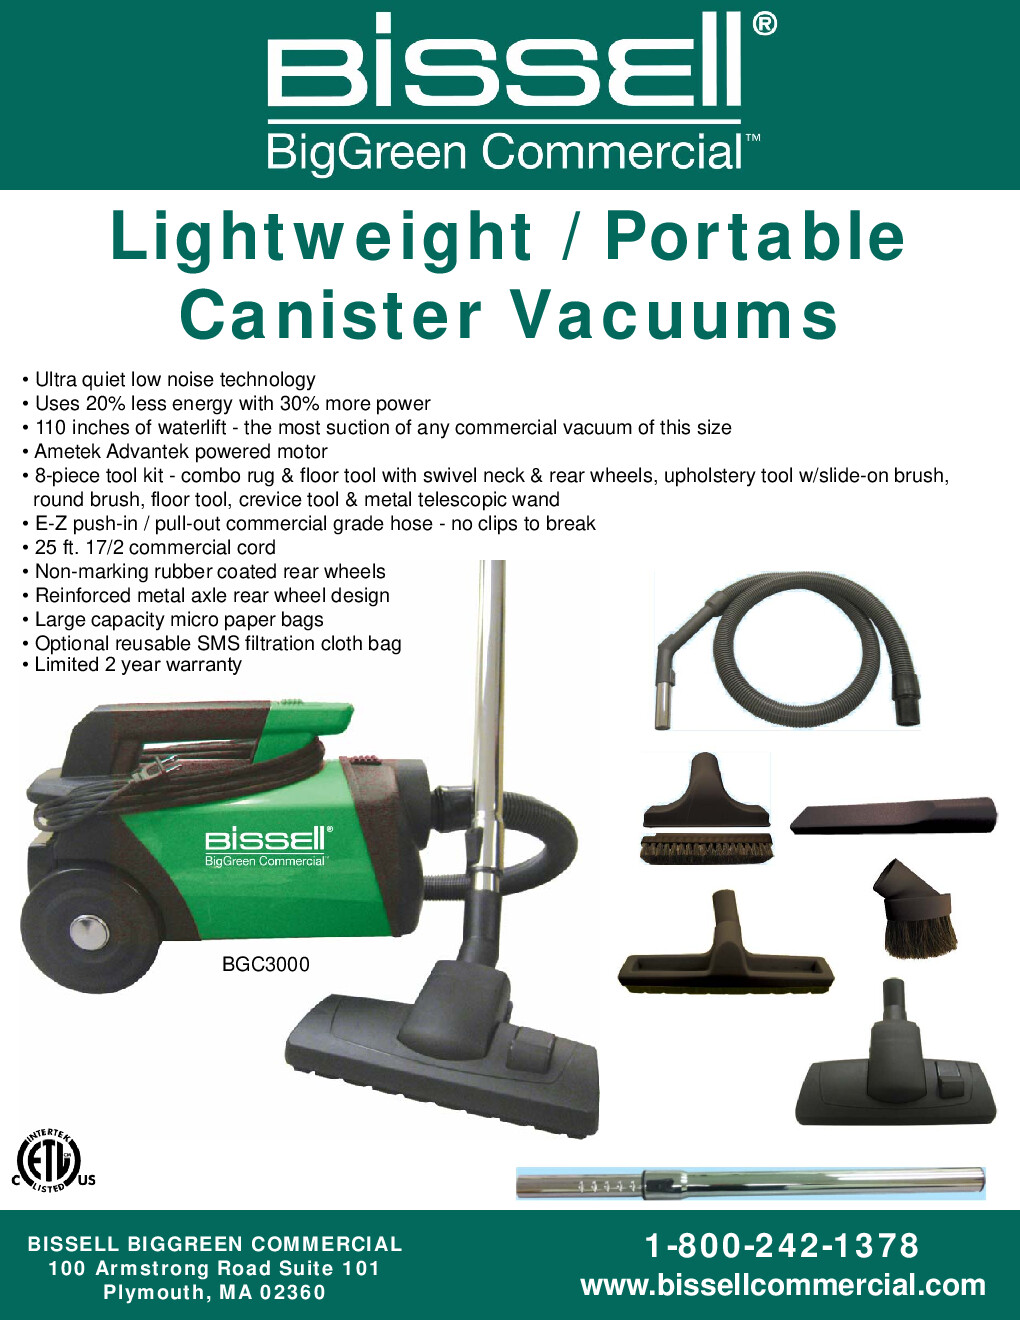 Bissell BGC3000 Canister Vacuum